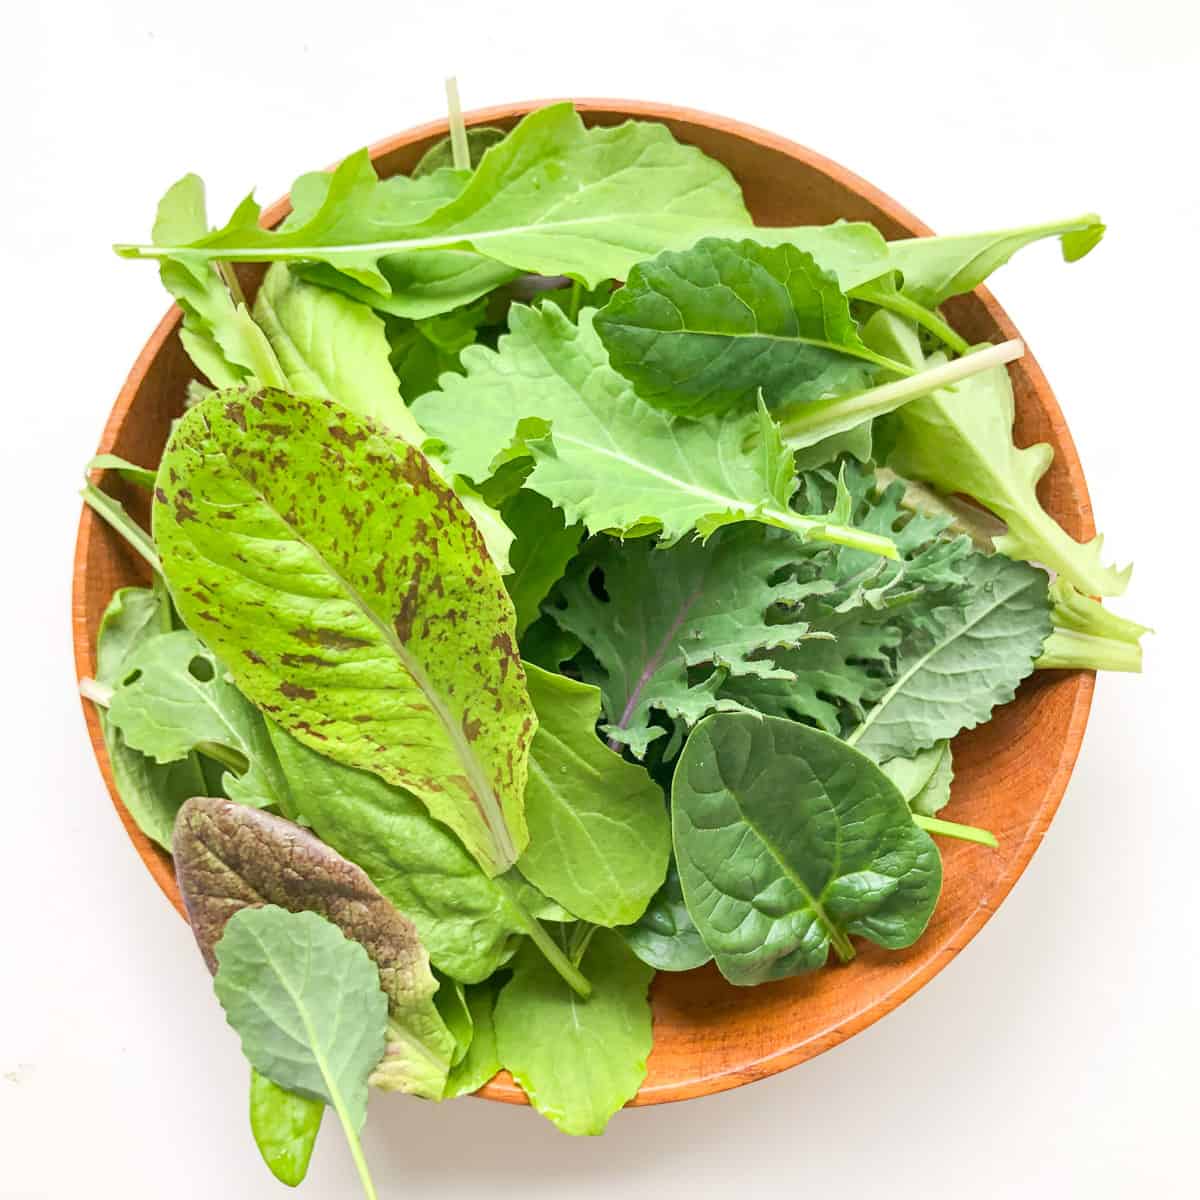 A bowl filled with harvested salad greens.